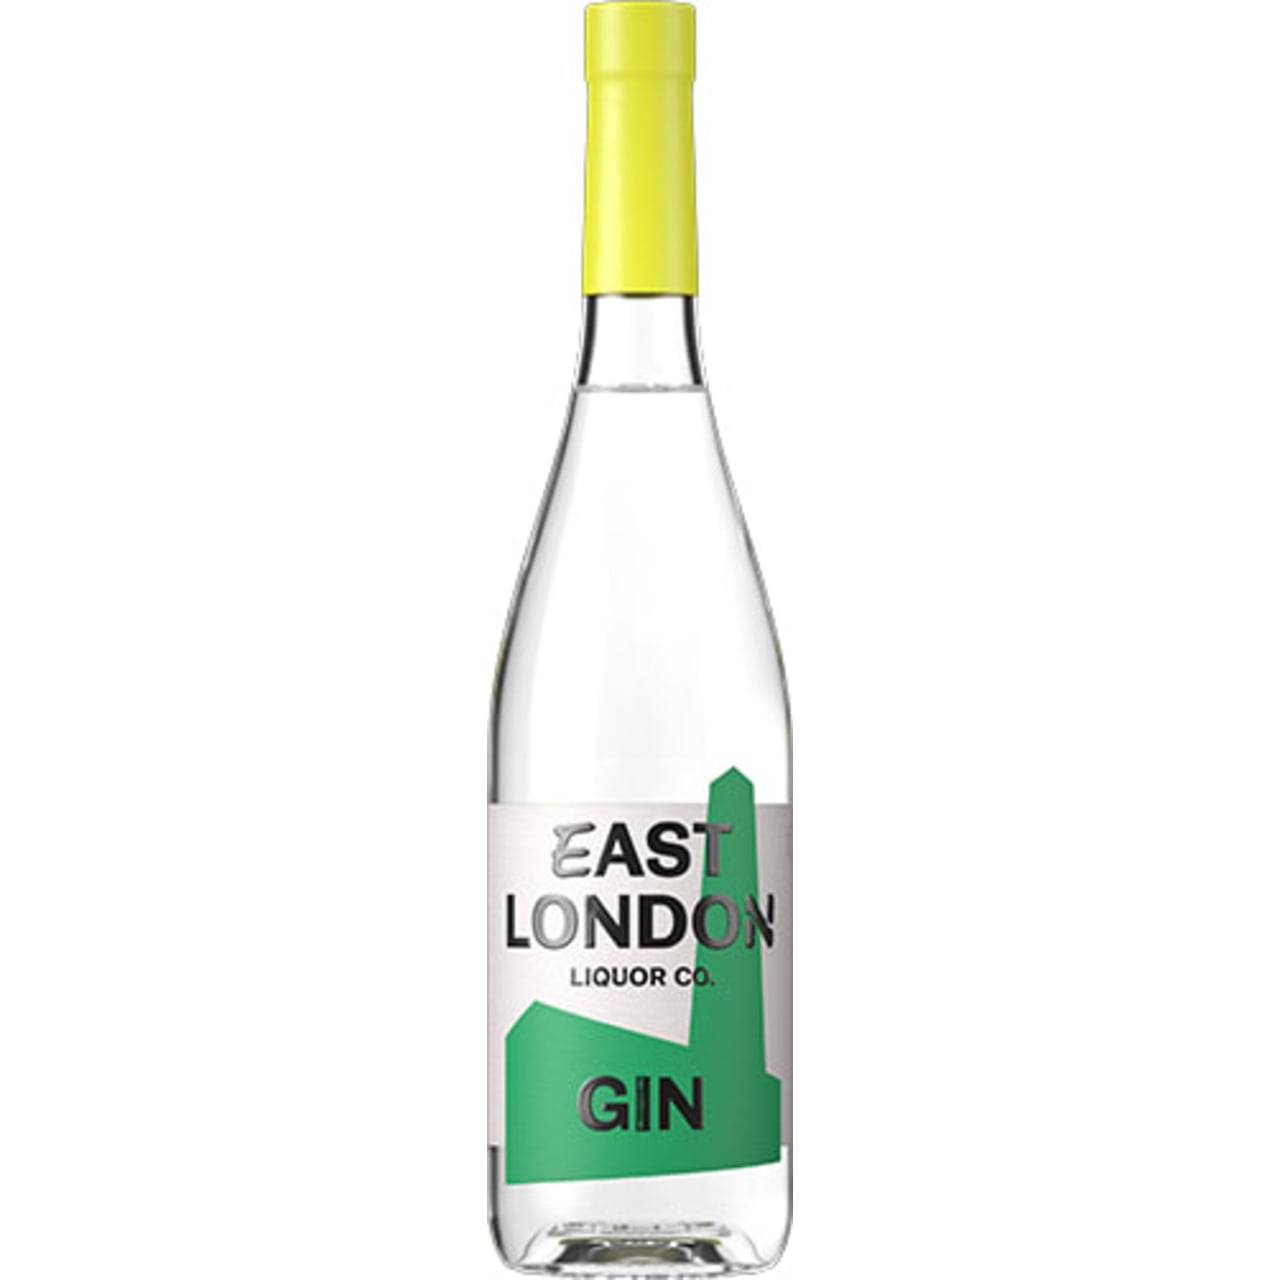 London Dry Gin combines notes of citrus and juniper, ending in a bold, spicy finish.